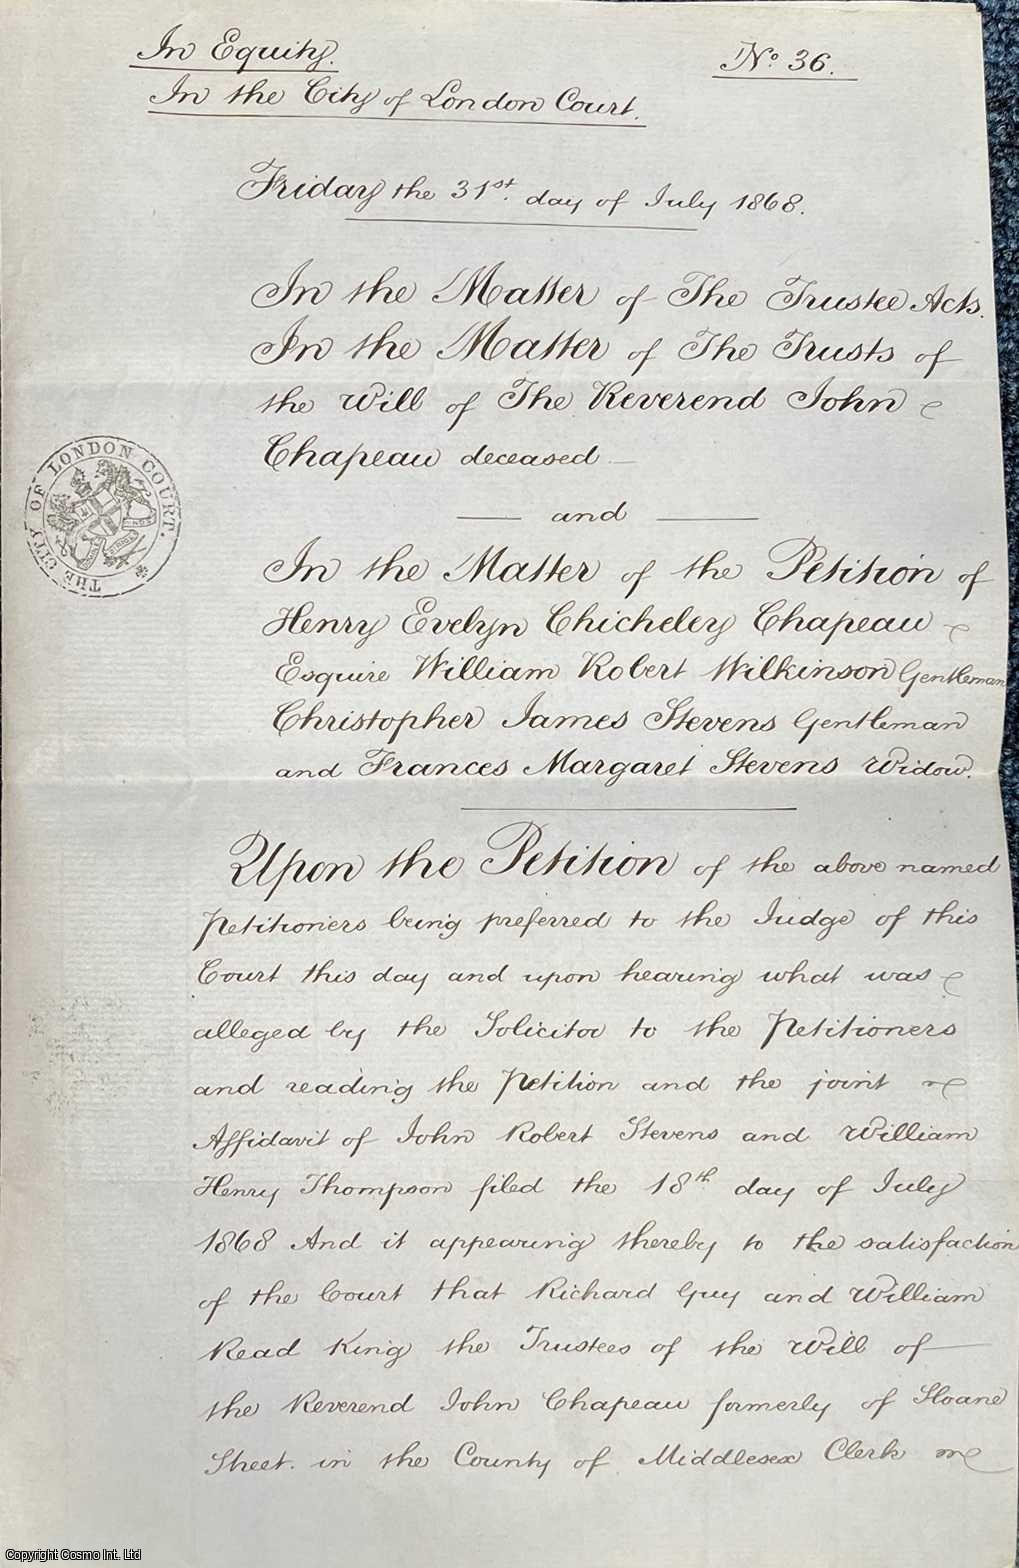 1868 Will - Handwritten Copy of the Will of The Reverend John Chapeau of Sloane Street, London, extracted from the Registry of the Prerogative Court of Canterbury, proved 13th November 1816. Twelve handwritten pages 20 x 32 cms, tied to form a booklet. Together with a Petition of 1868 for appointing a new Trustee with the stamp of the City of London Court. Two Items.